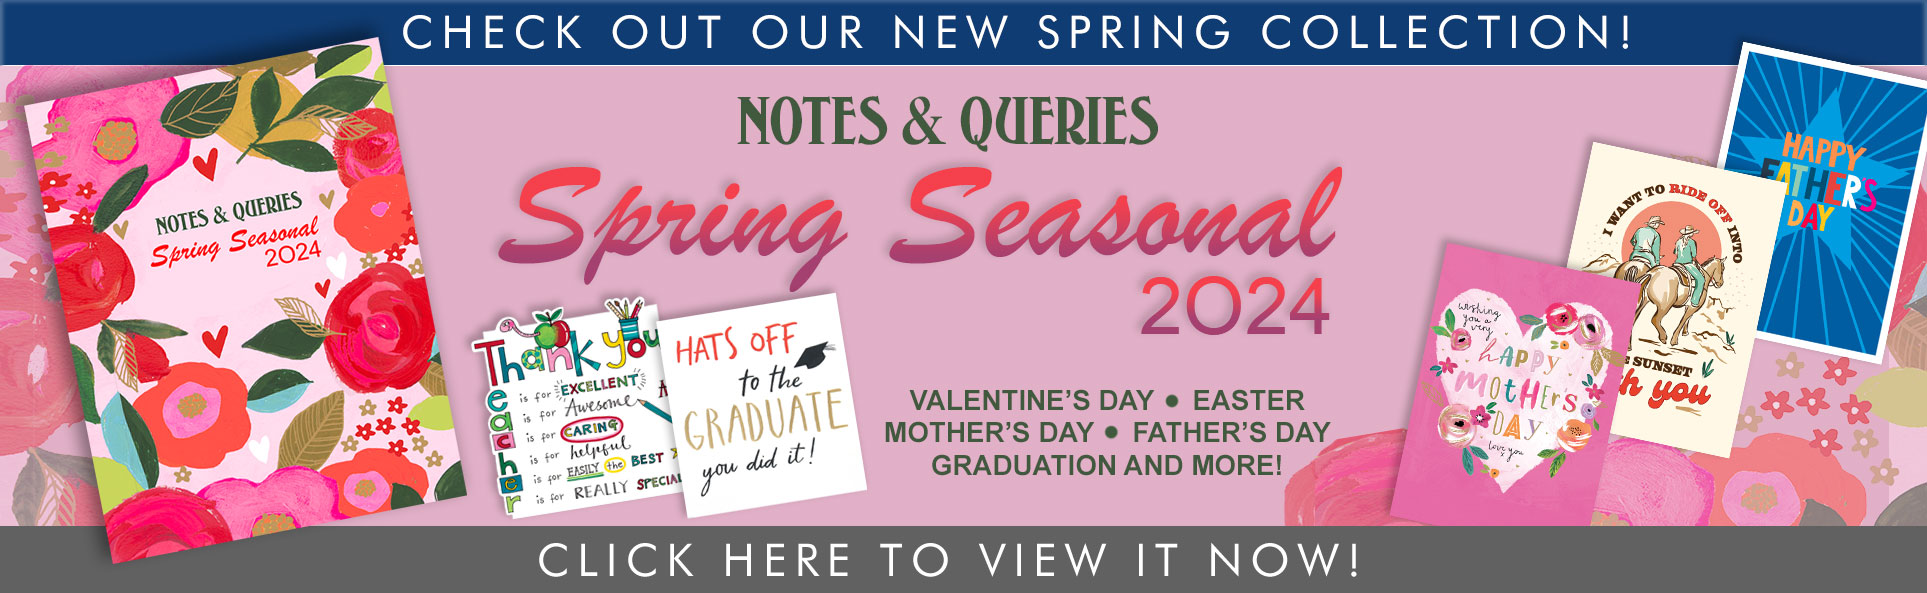 Notes & Queries 2024 Spring Collection is Now Online!